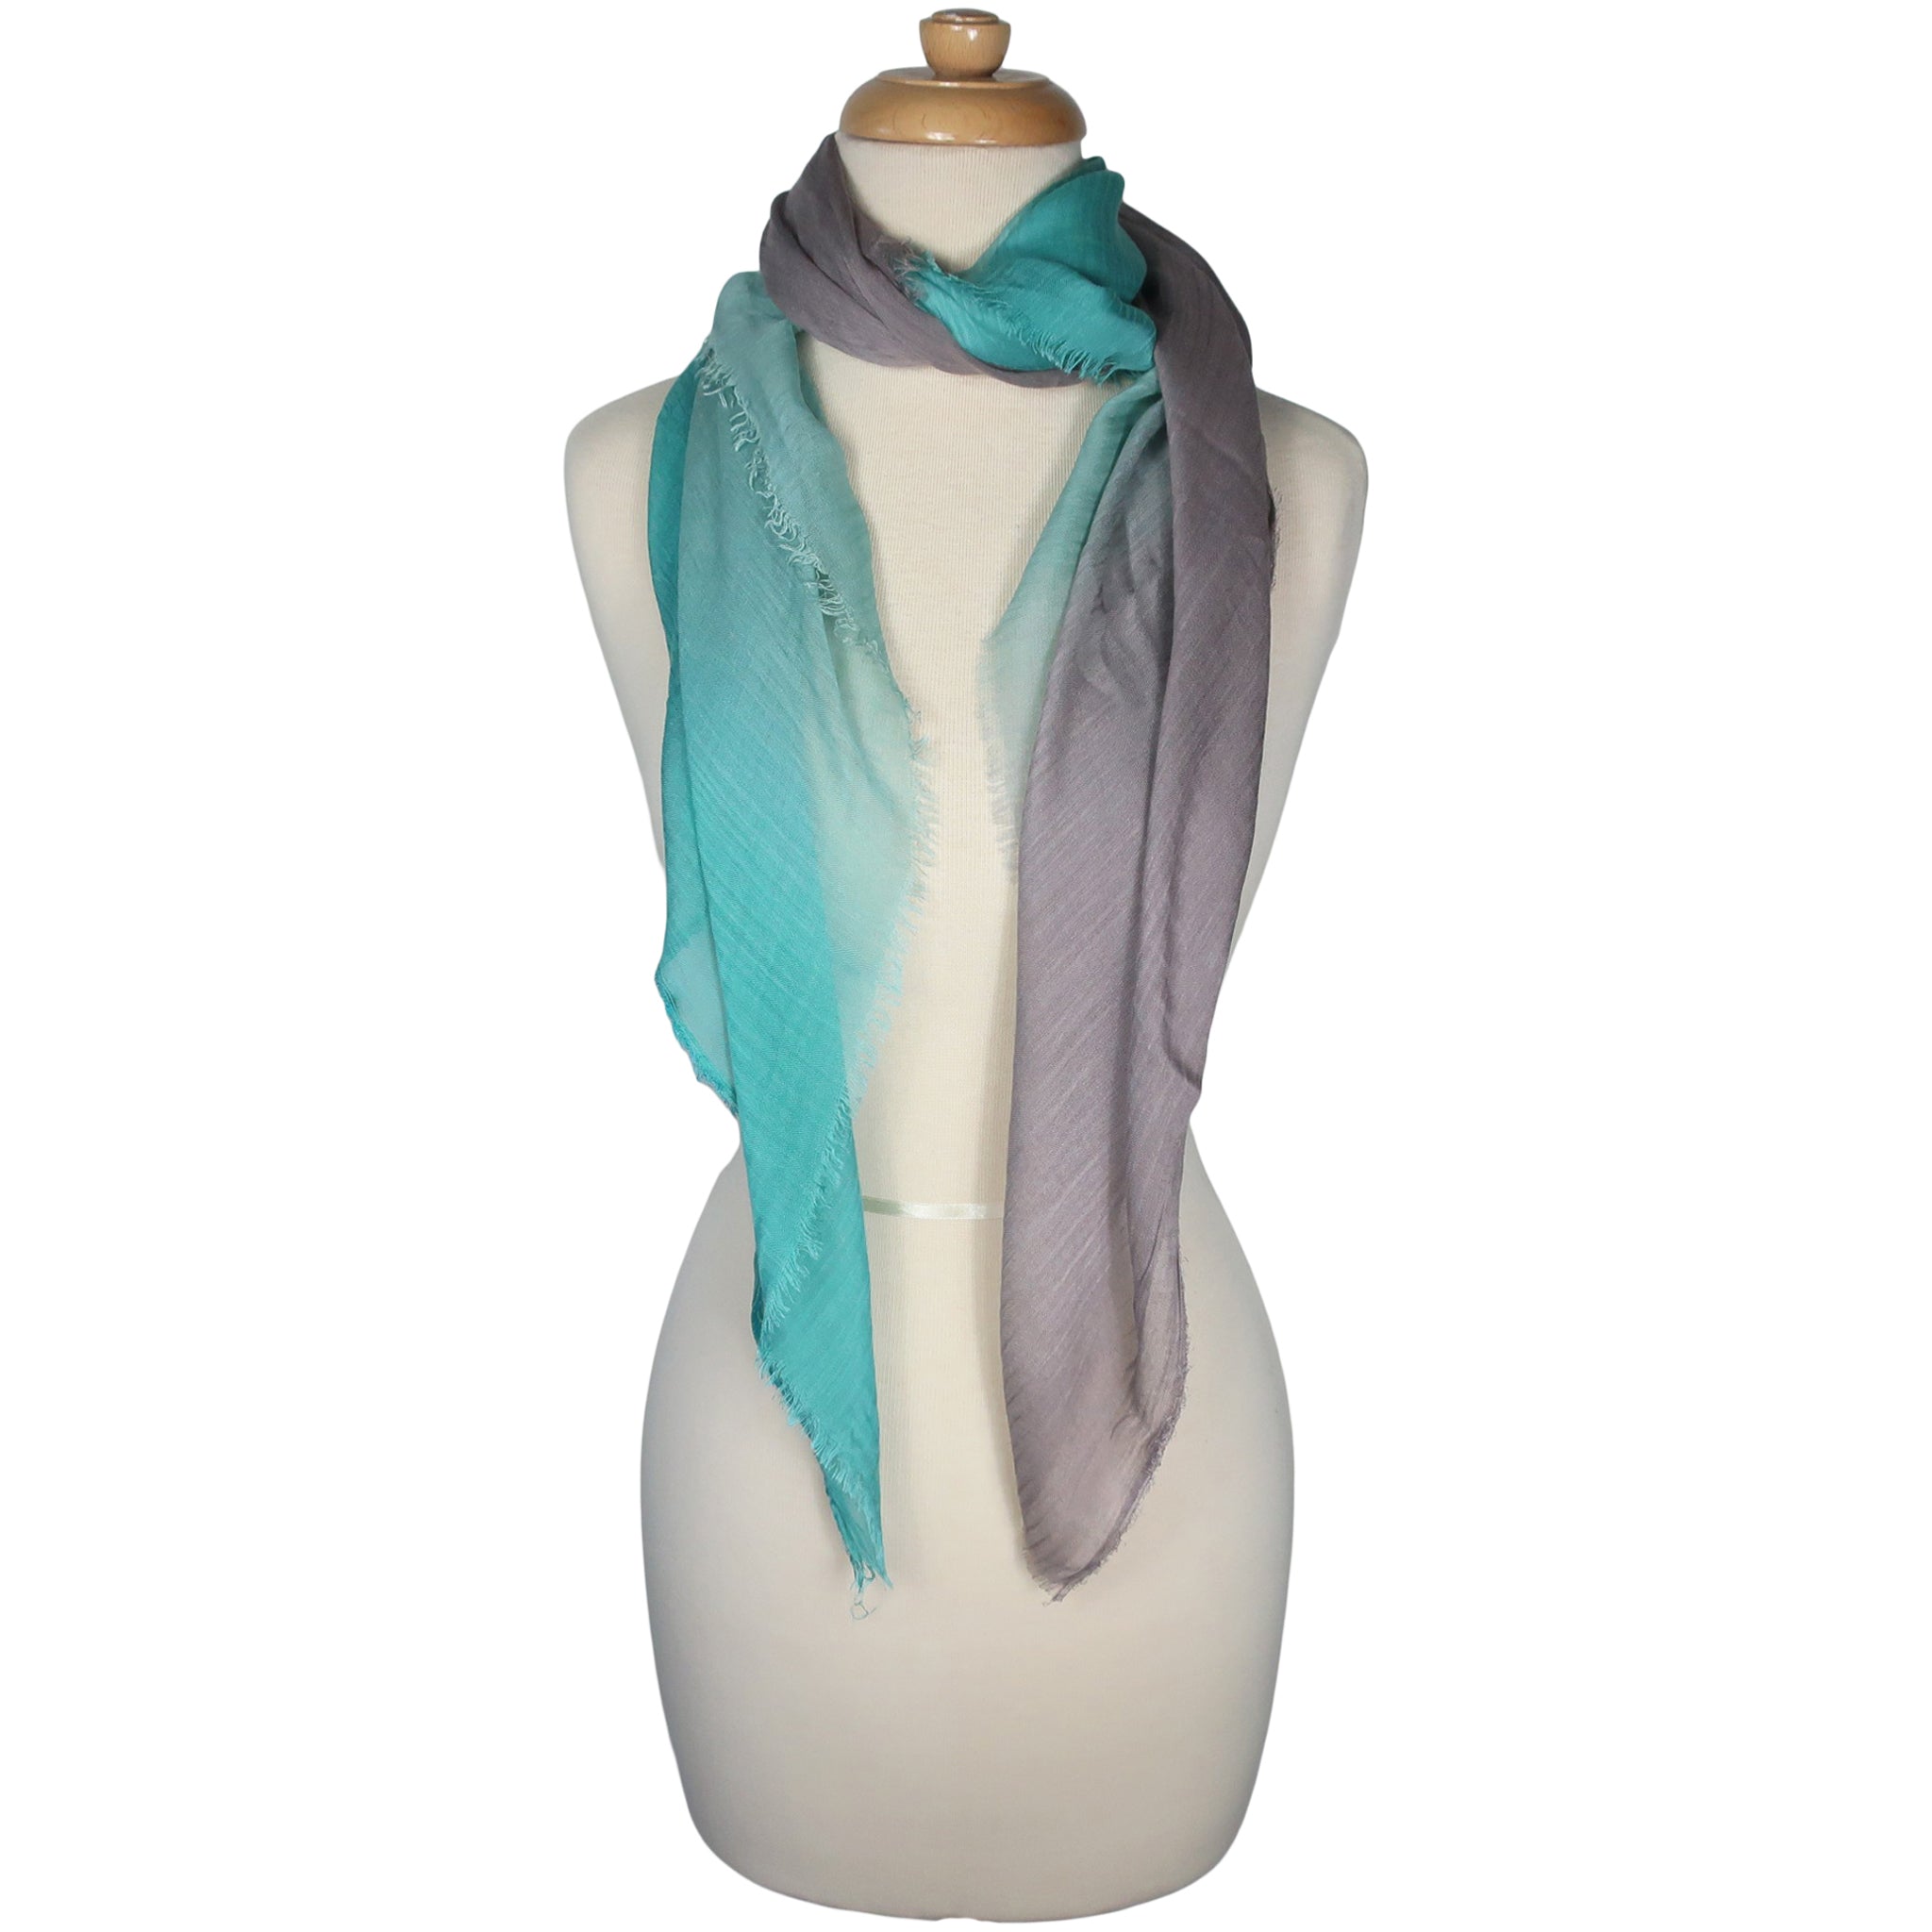 Blue Pacific Dream Cashmere and Silk Scarf in Aquifer and Taupe 47 x 37